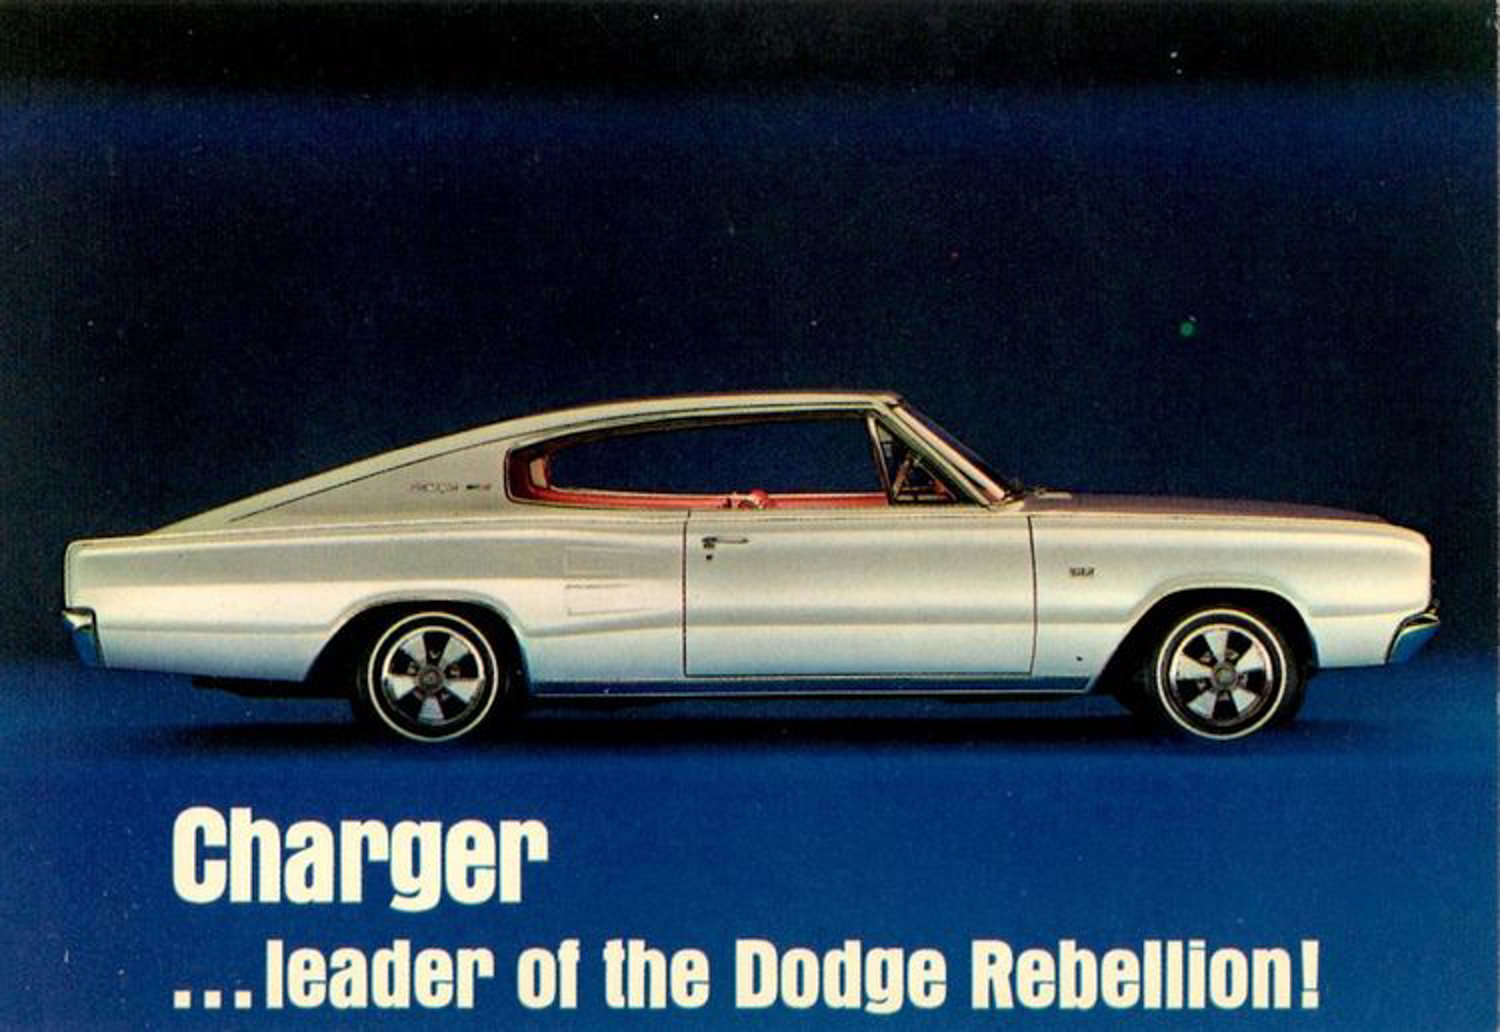 The Charger was introduced as part of their "Dodge Rebellion" 